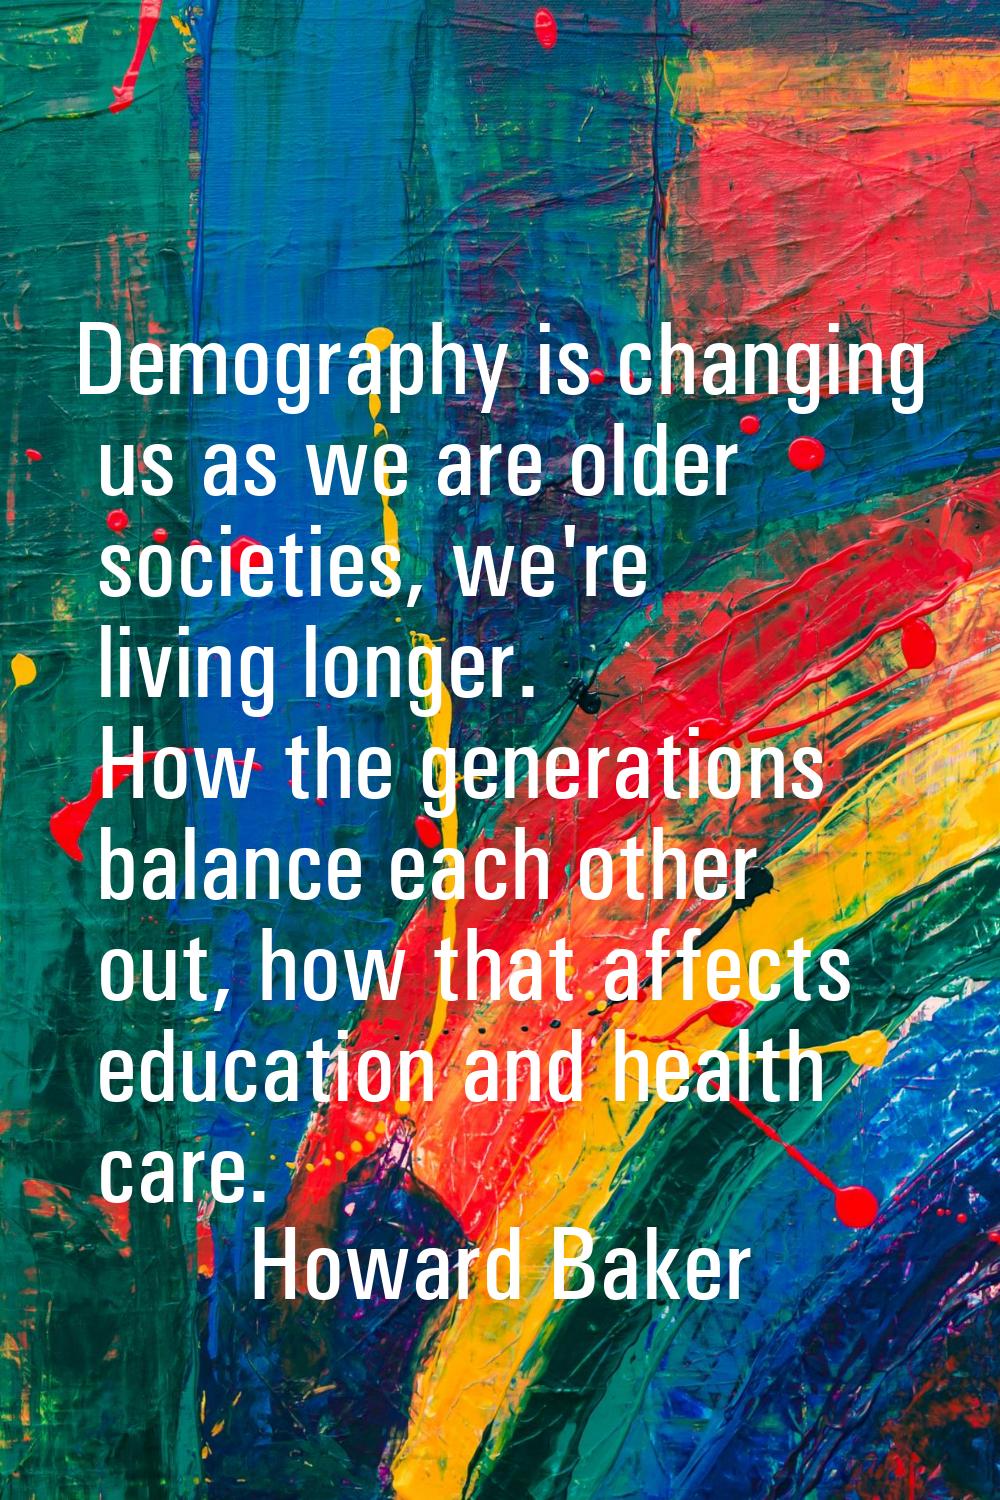 Demography is changing us as we are older societies, we're living longer. How the generations balan